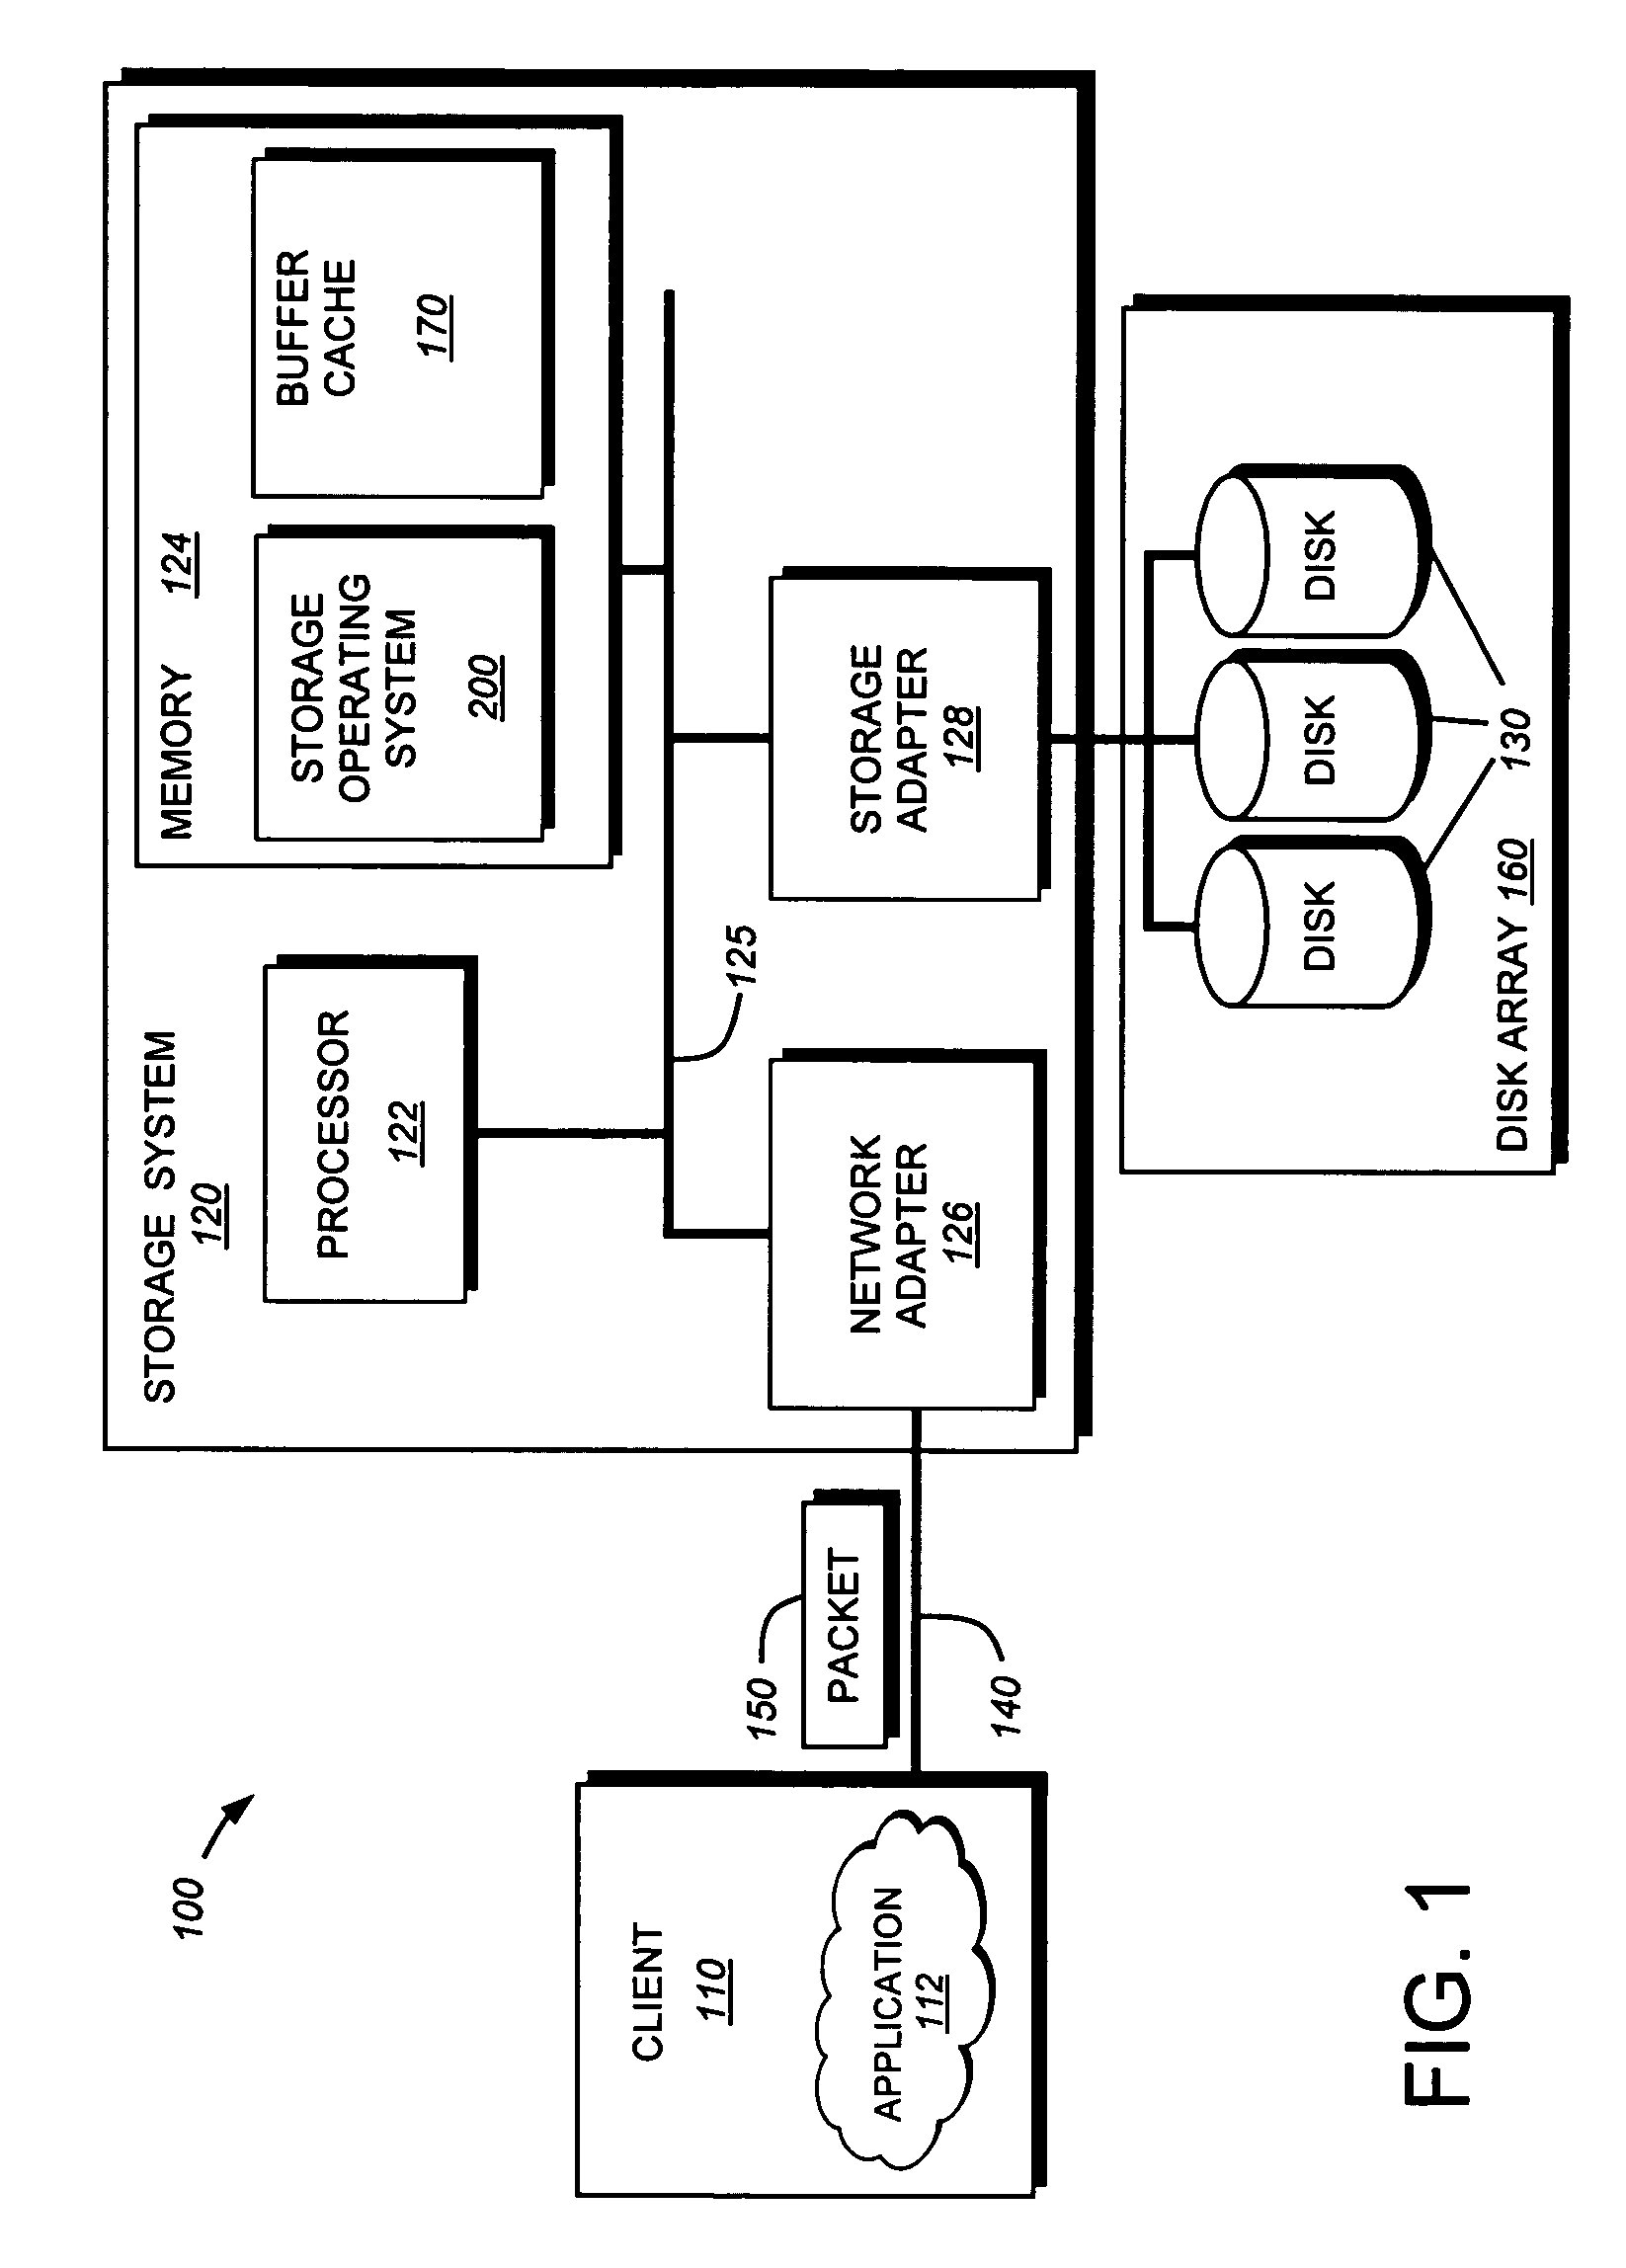 System and method for efficiently calculating storage required to split a clone volume